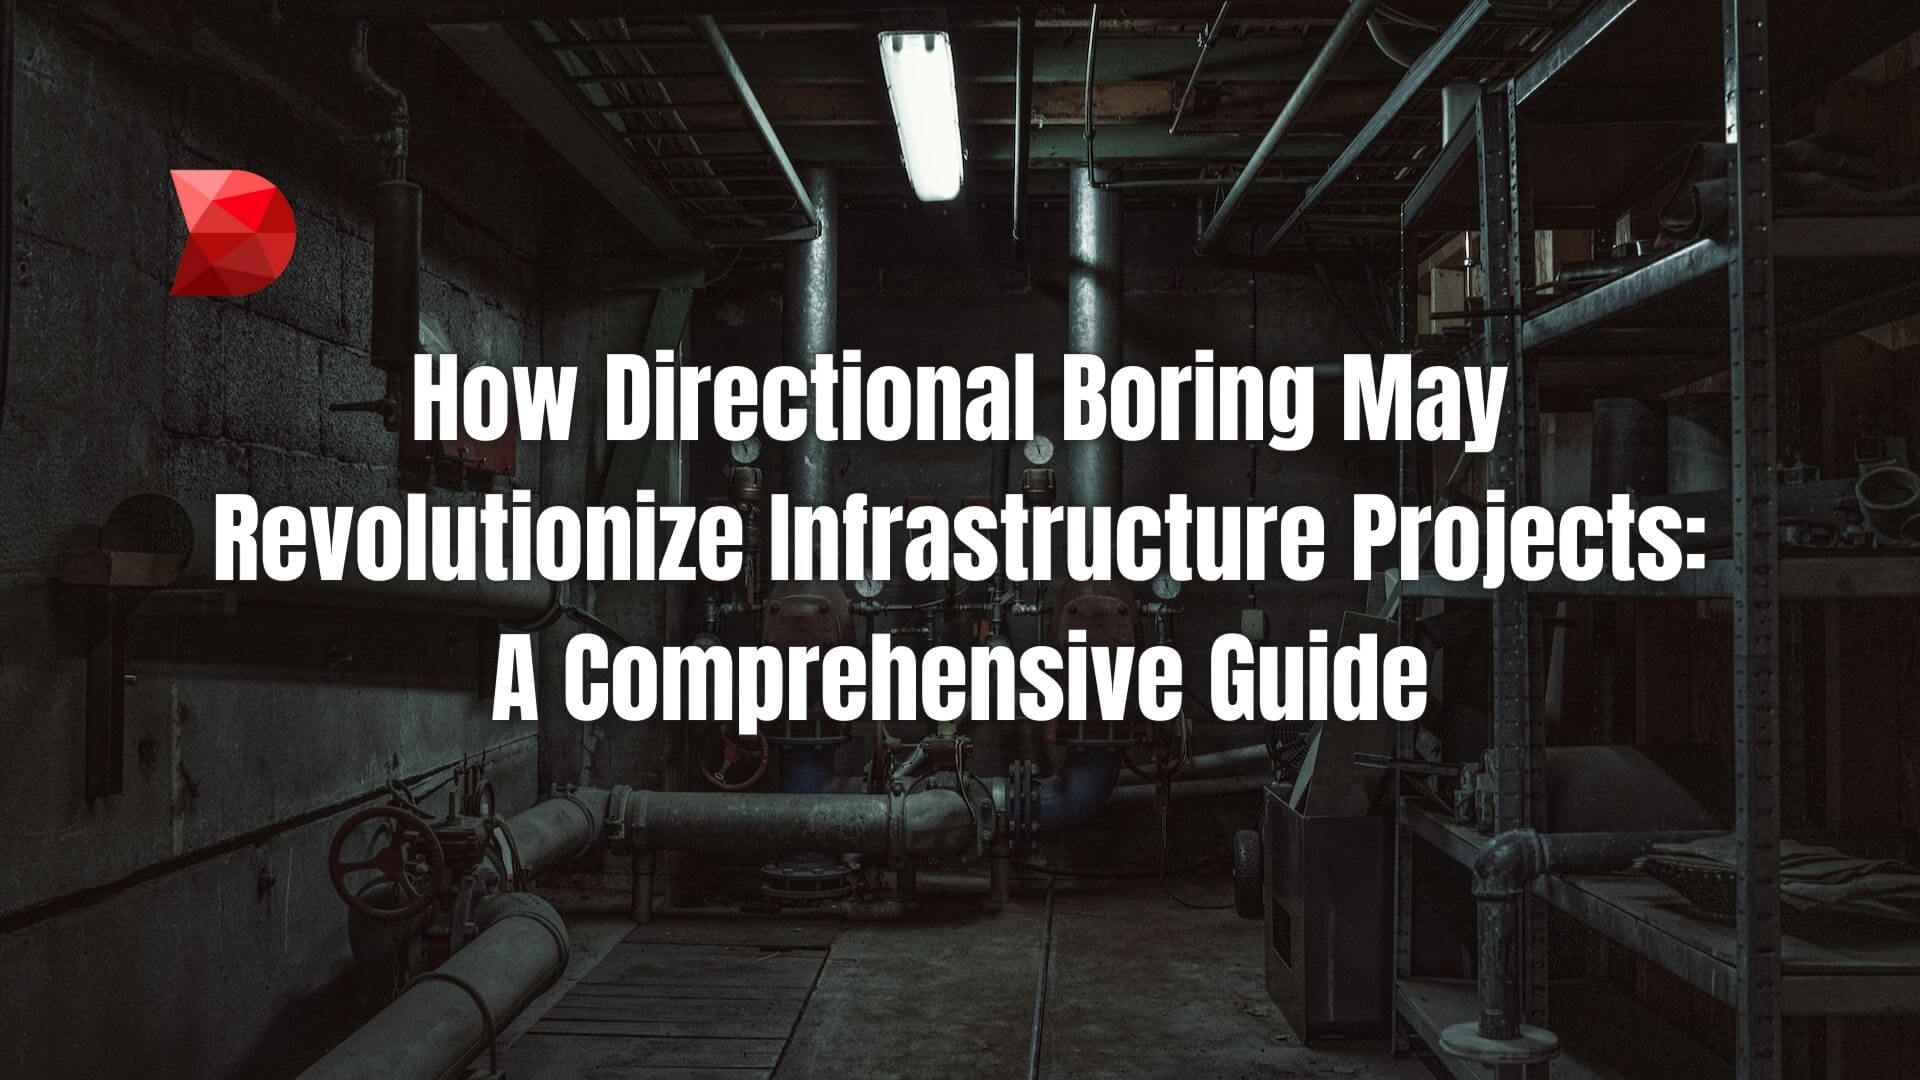 Directional boring is an innovative trenchless technology for installing underground utilities. But how does it work? Learn how!